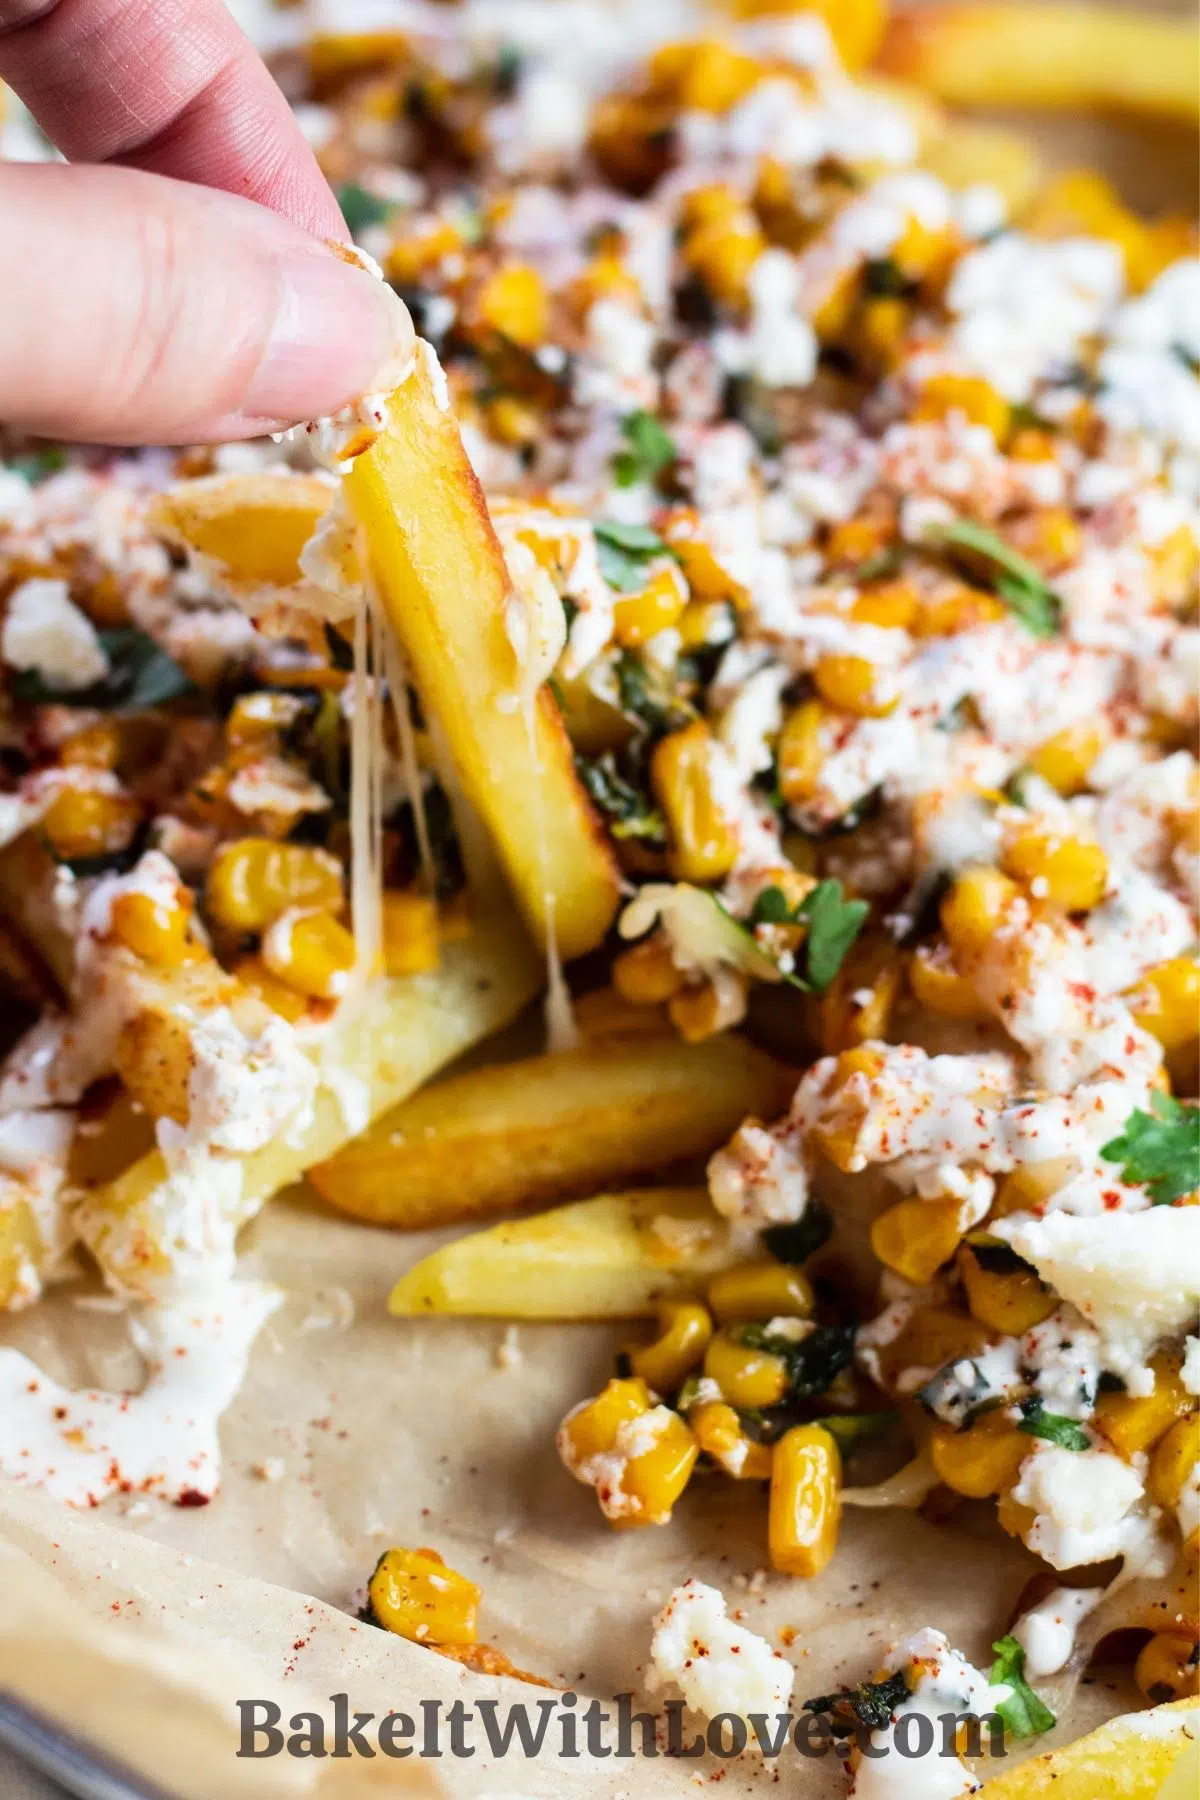 Loaded elotes-style corn fries served in baking sheet on parchment paper.